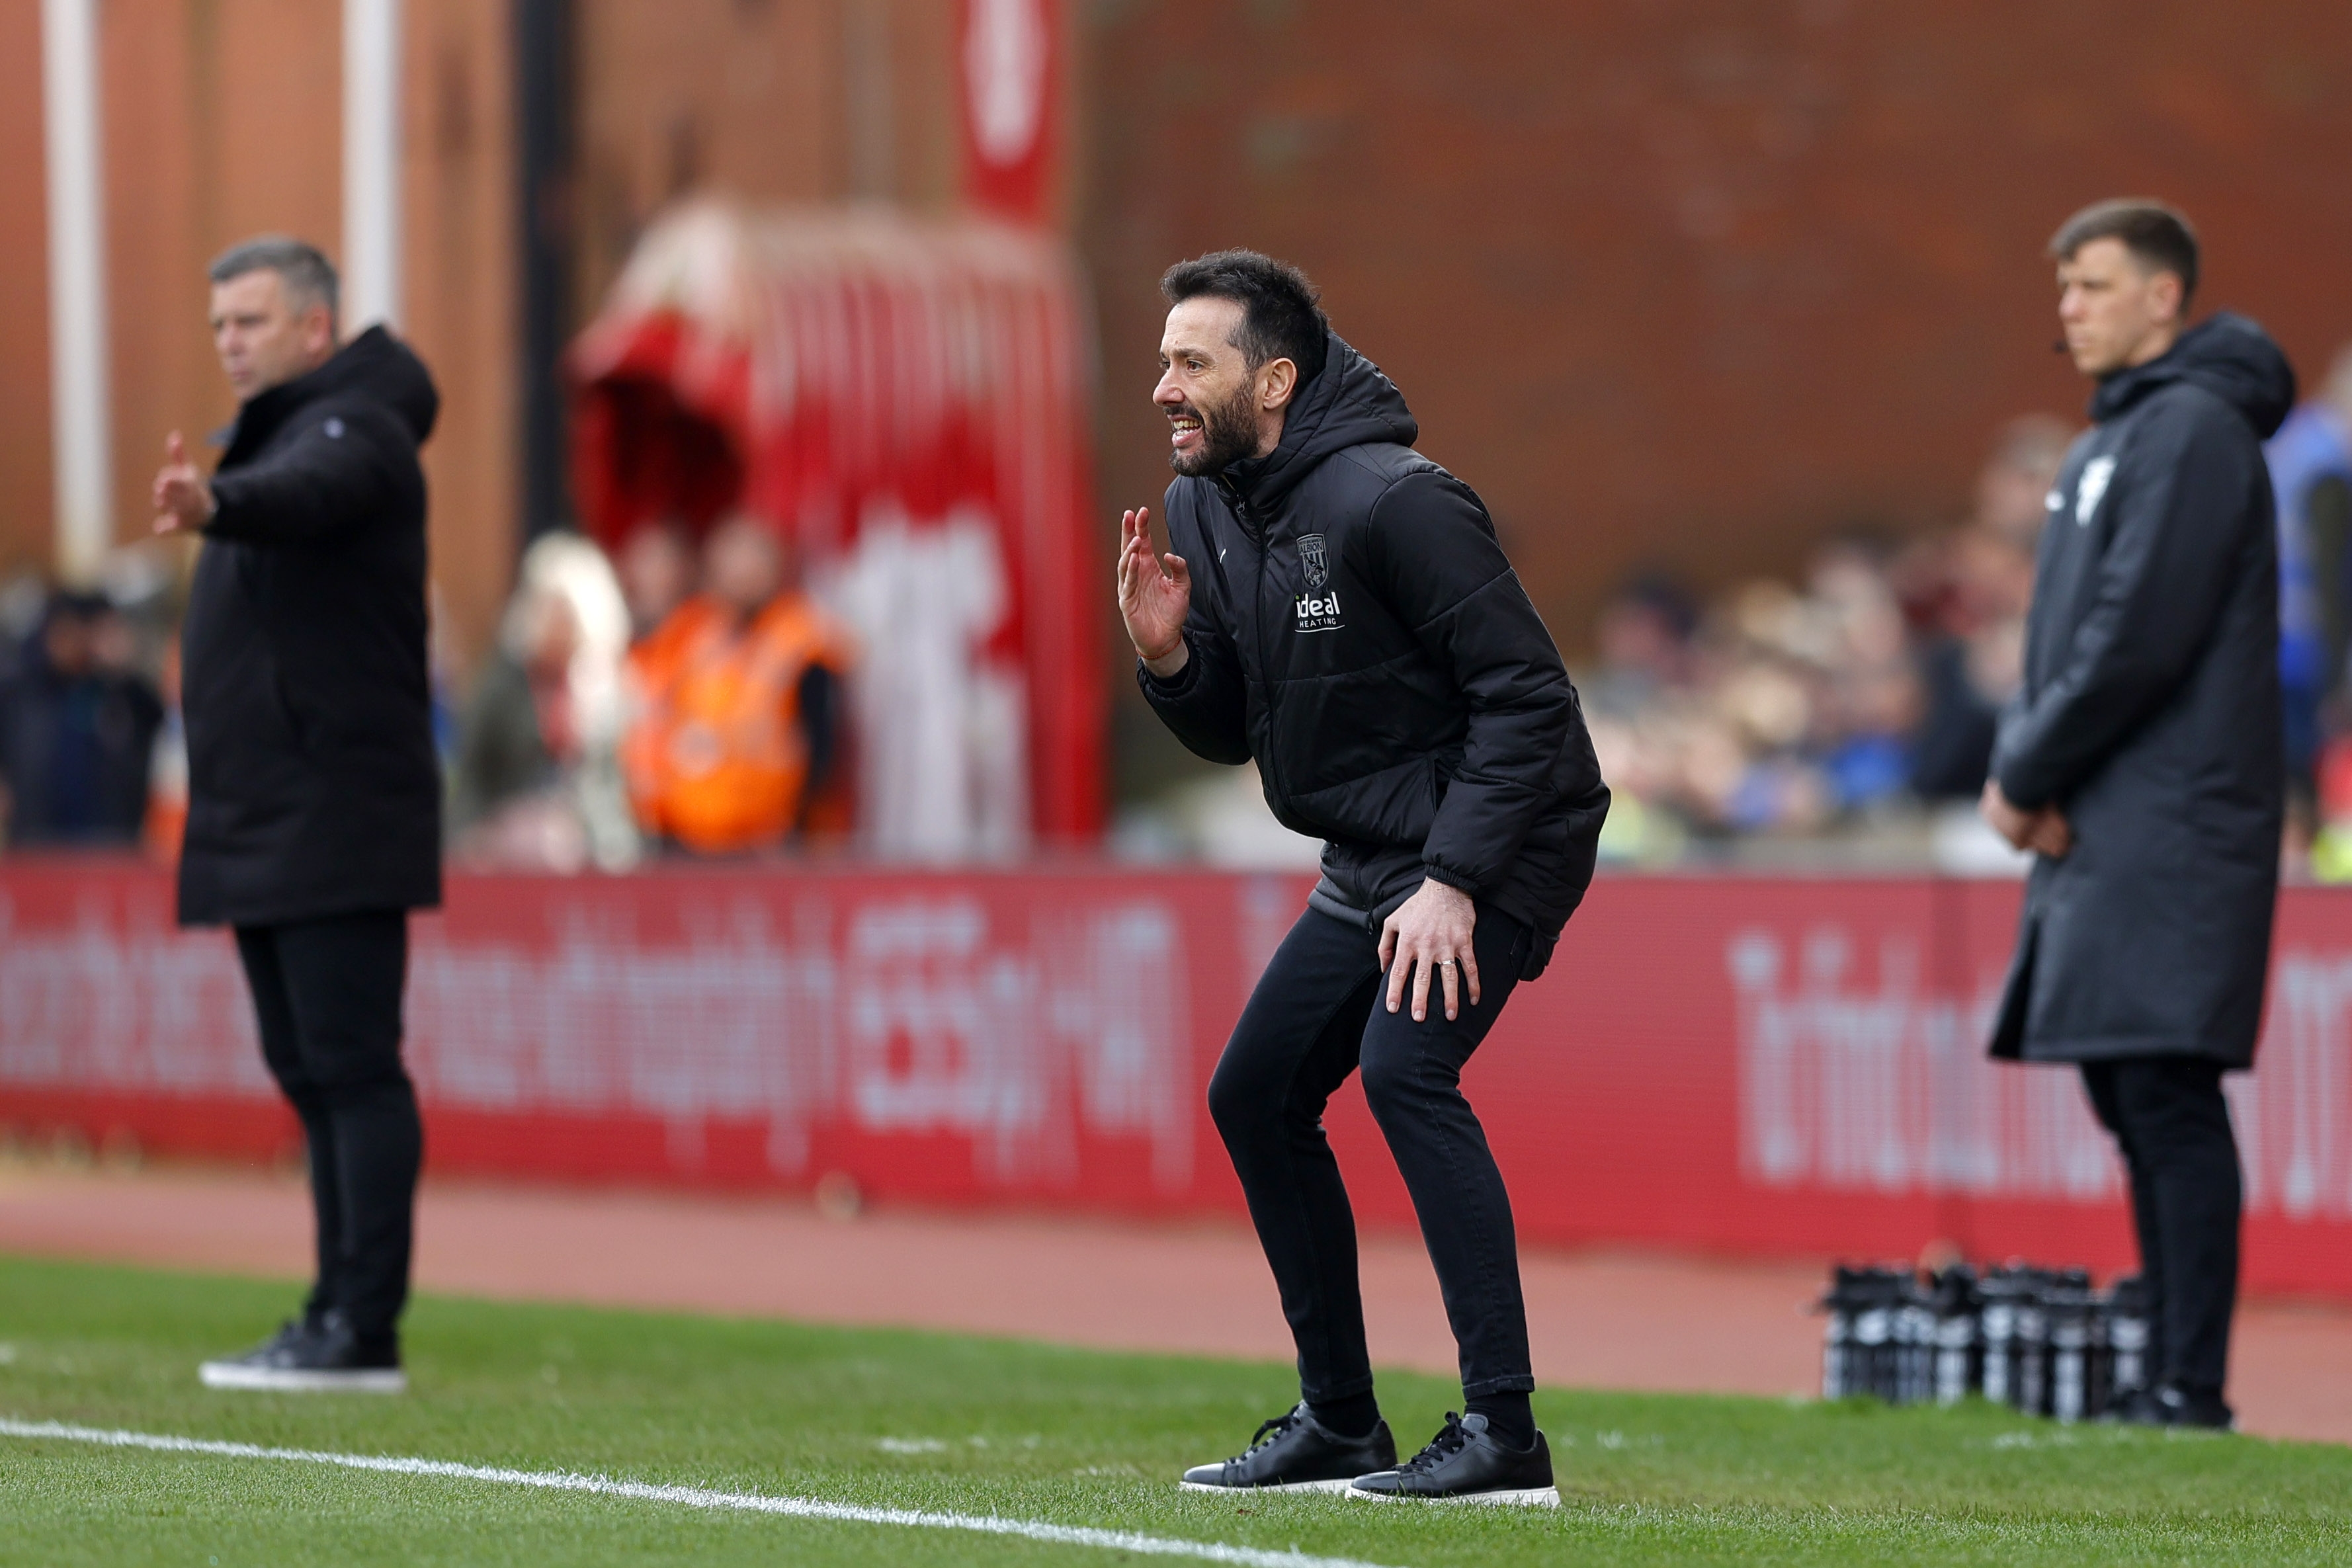 Carlos Corberán delivering information to his players on the side of the pitch against Stoke City